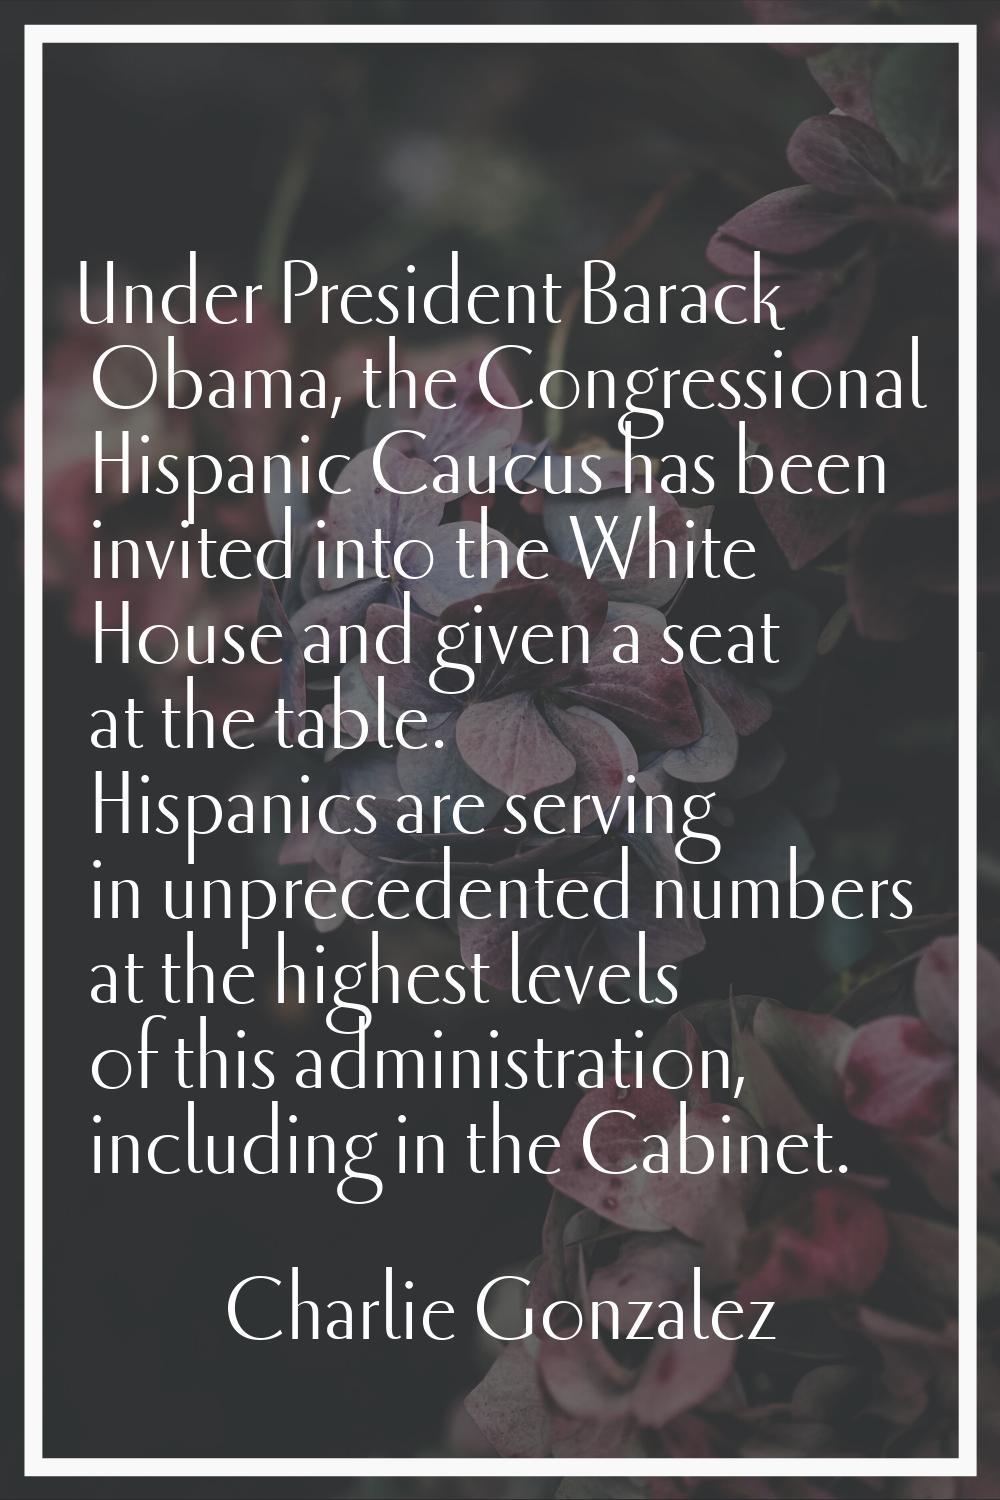 Under President Barack Obama, the Congressional Hispanic Caucus has been invited into the White Hou